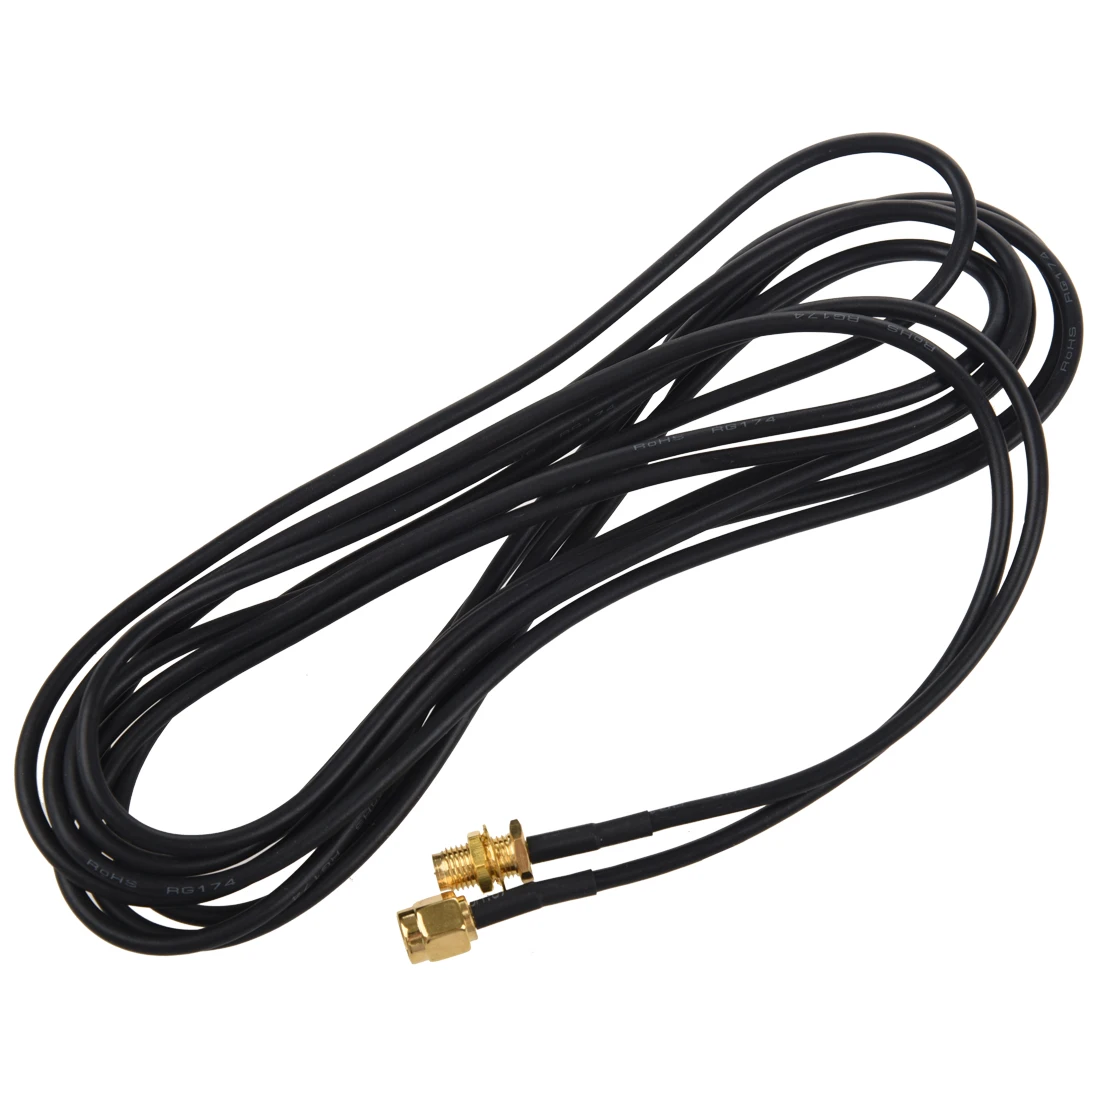 3M Meter Antenna RP-SMA Extension Cable for WiFi Router 